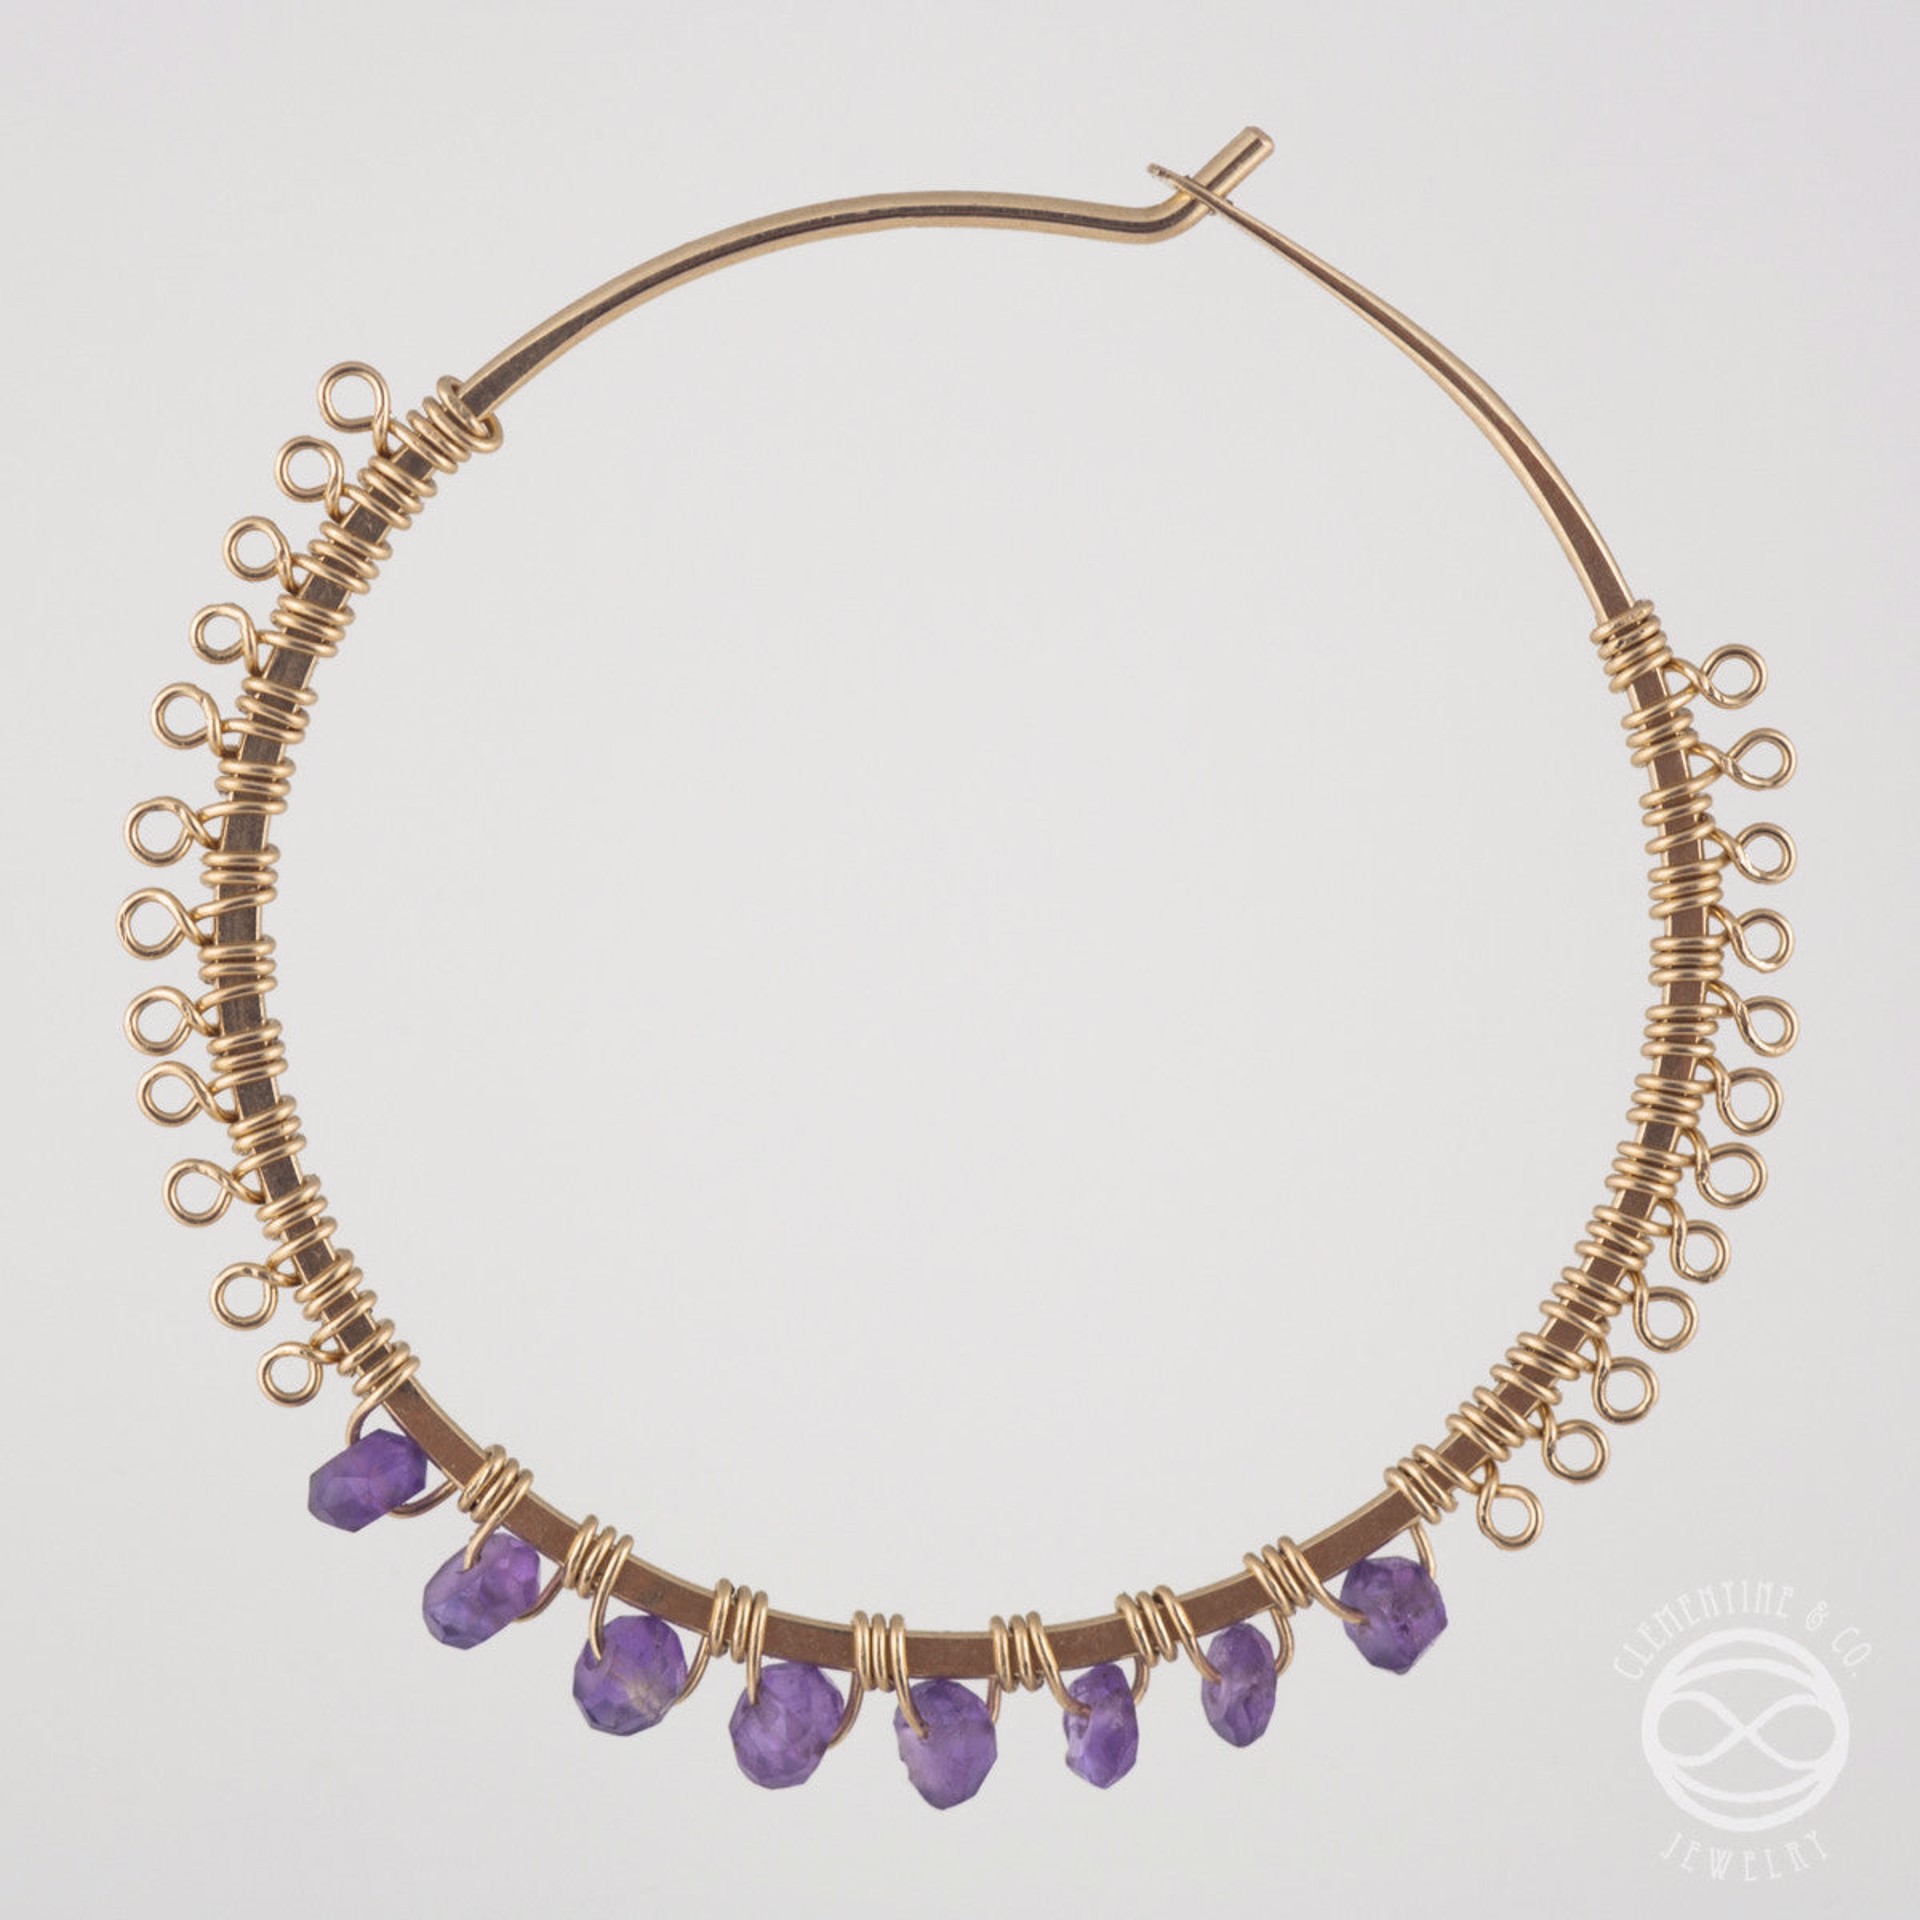 Filigree Hoops in Gold - amethyst by Clementine & Co. Jewelry